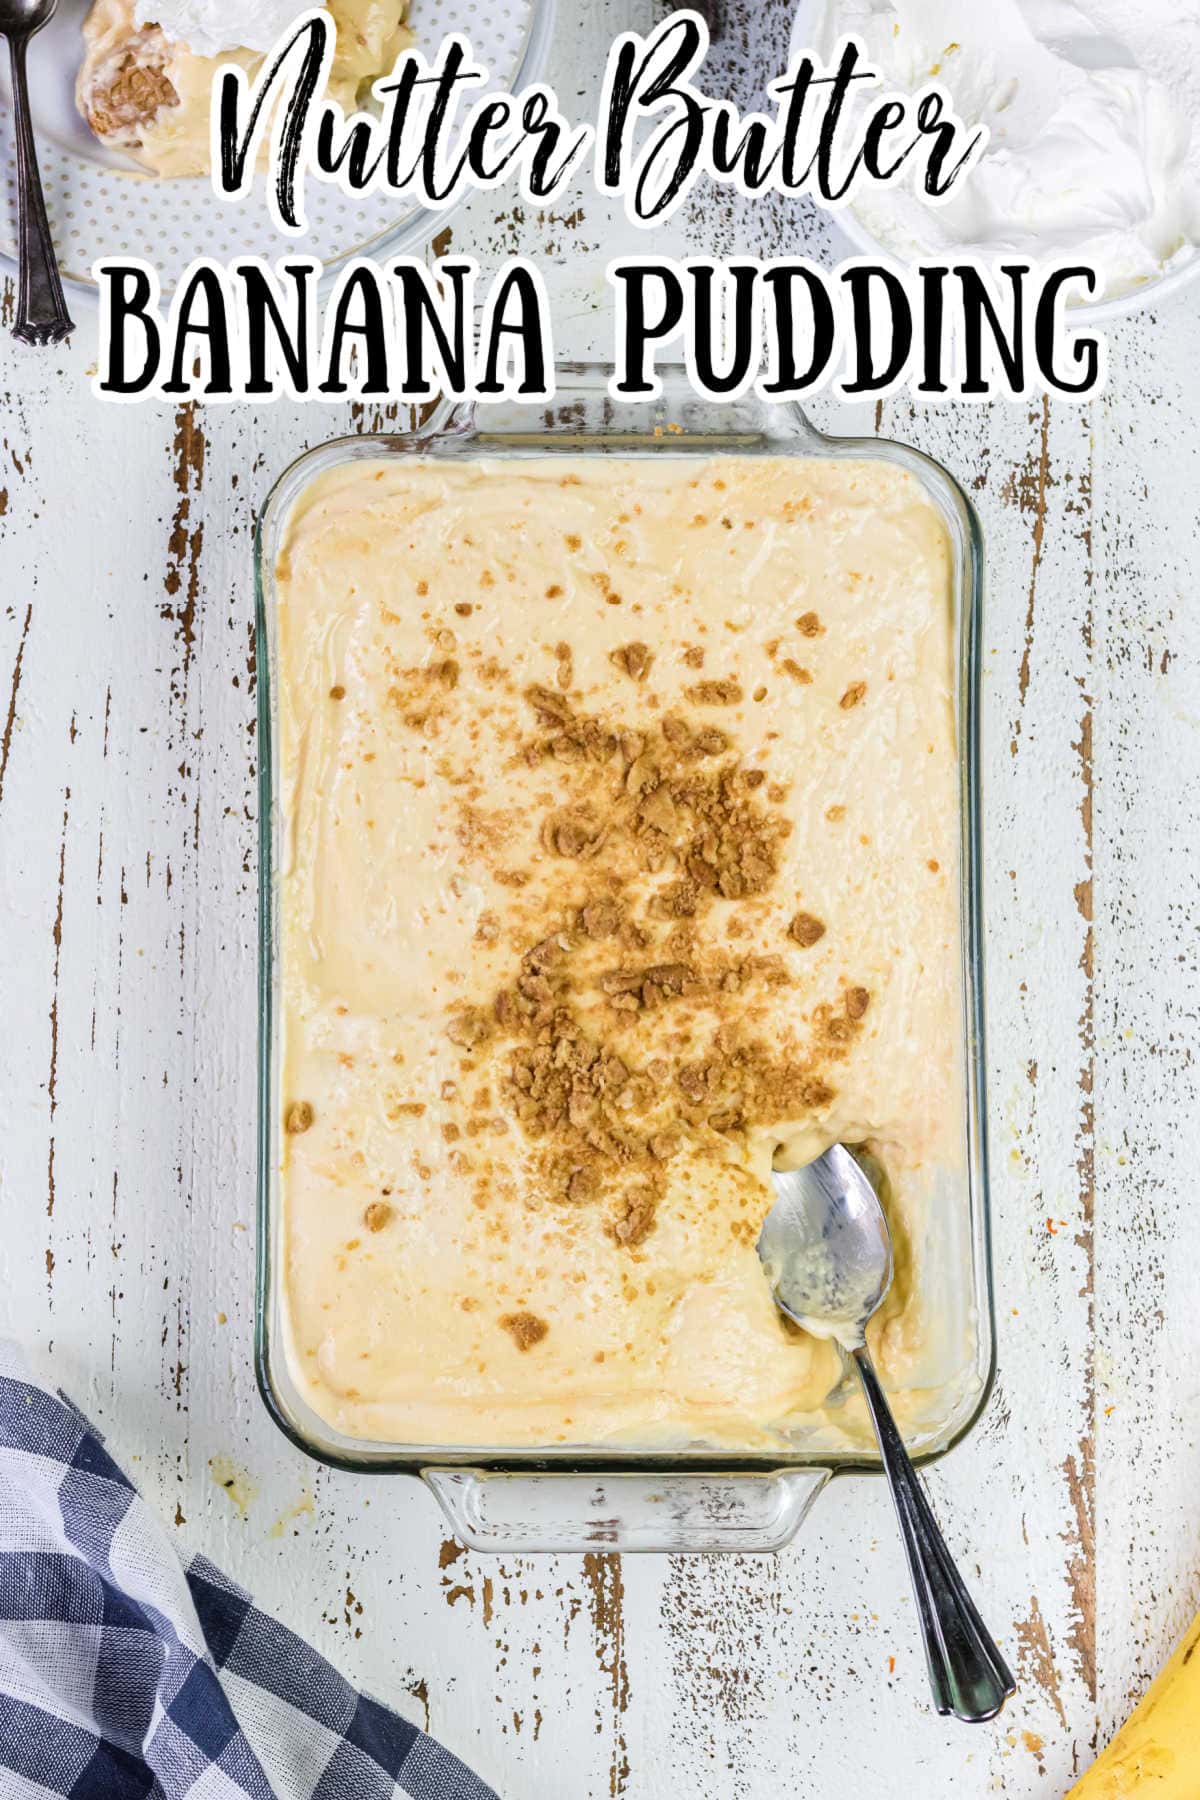 Overhead view of banana pudding in a glass pan with title text overlay.